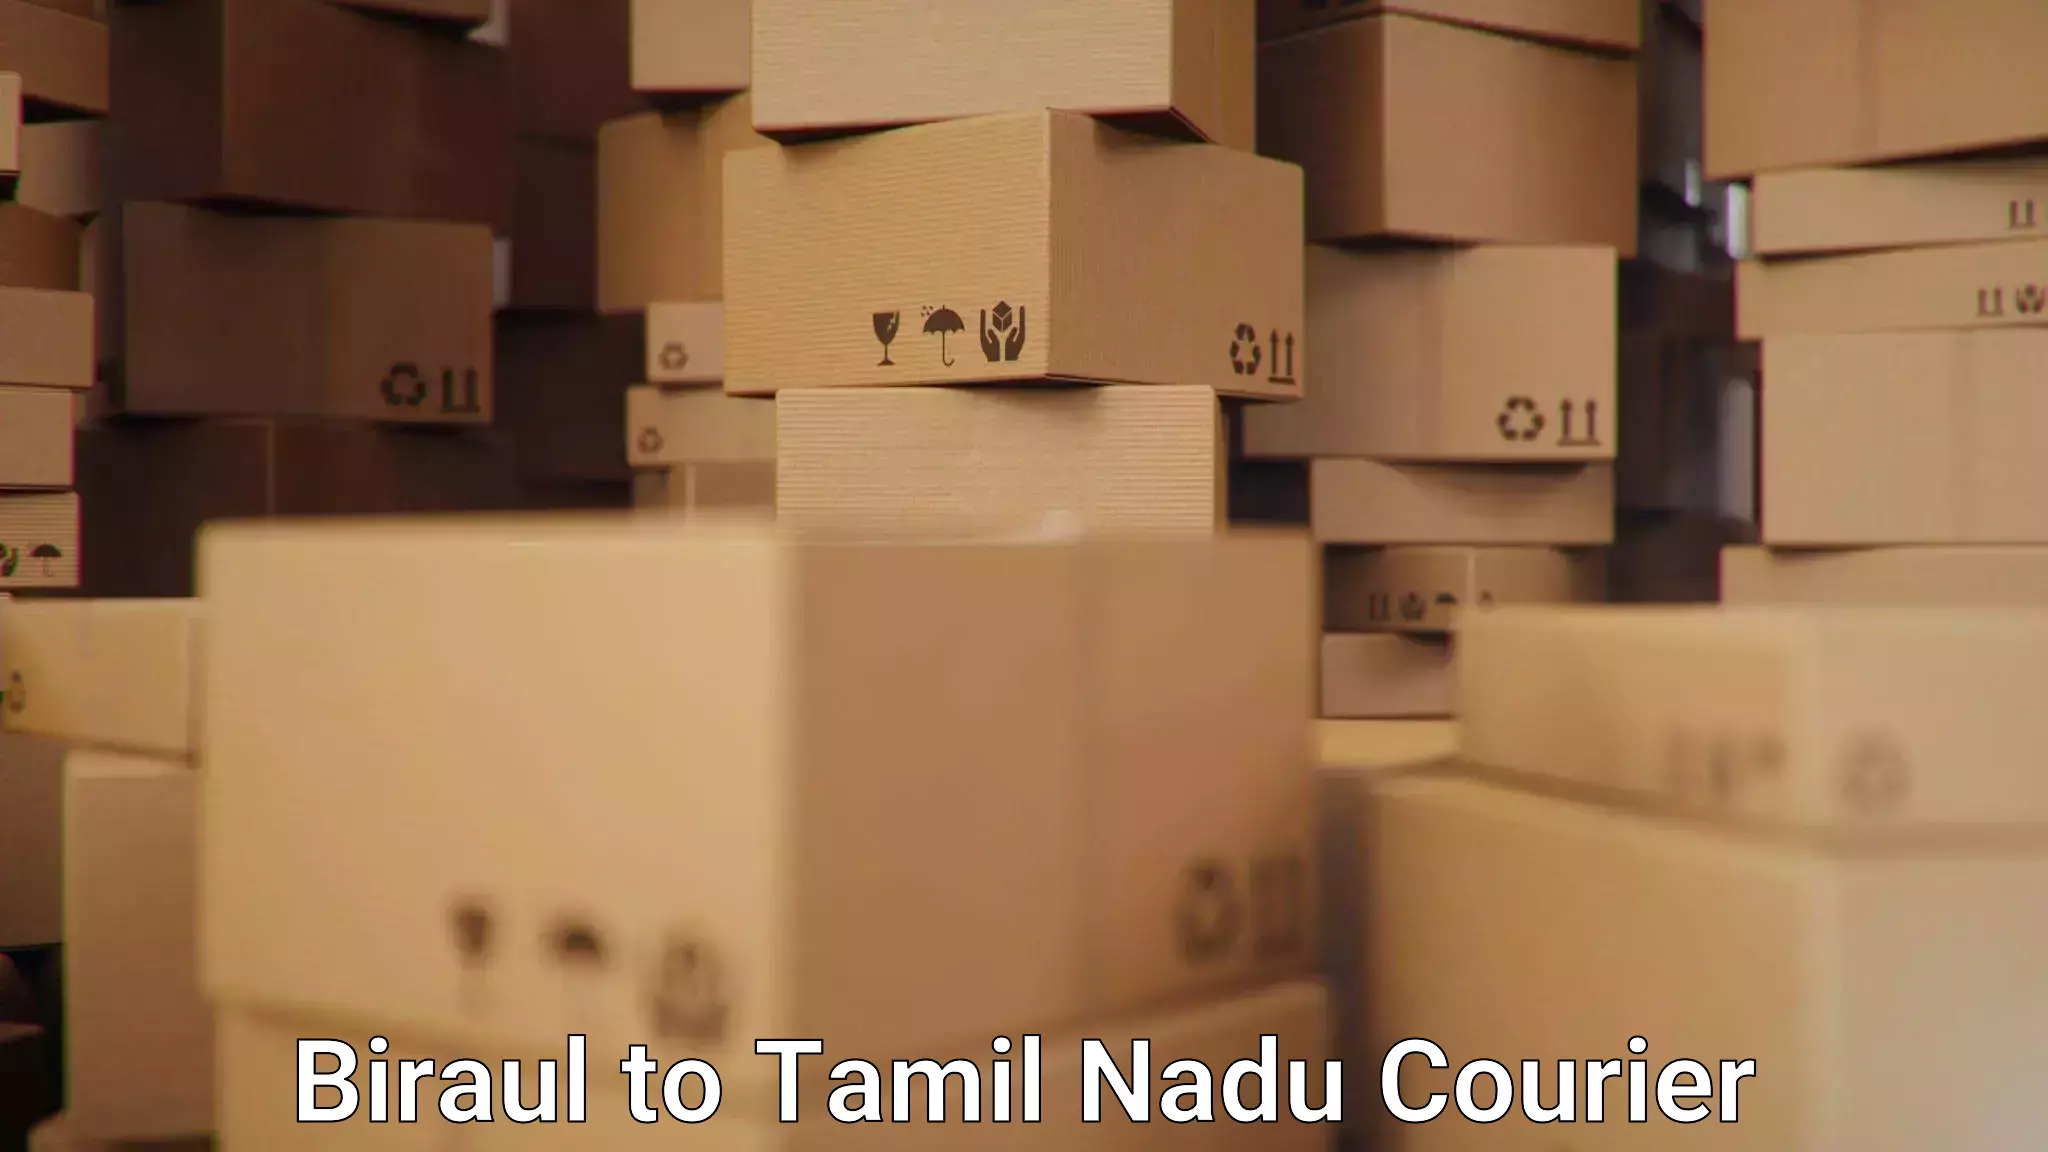 Rural area delivery Biraul to Tamil Nadu